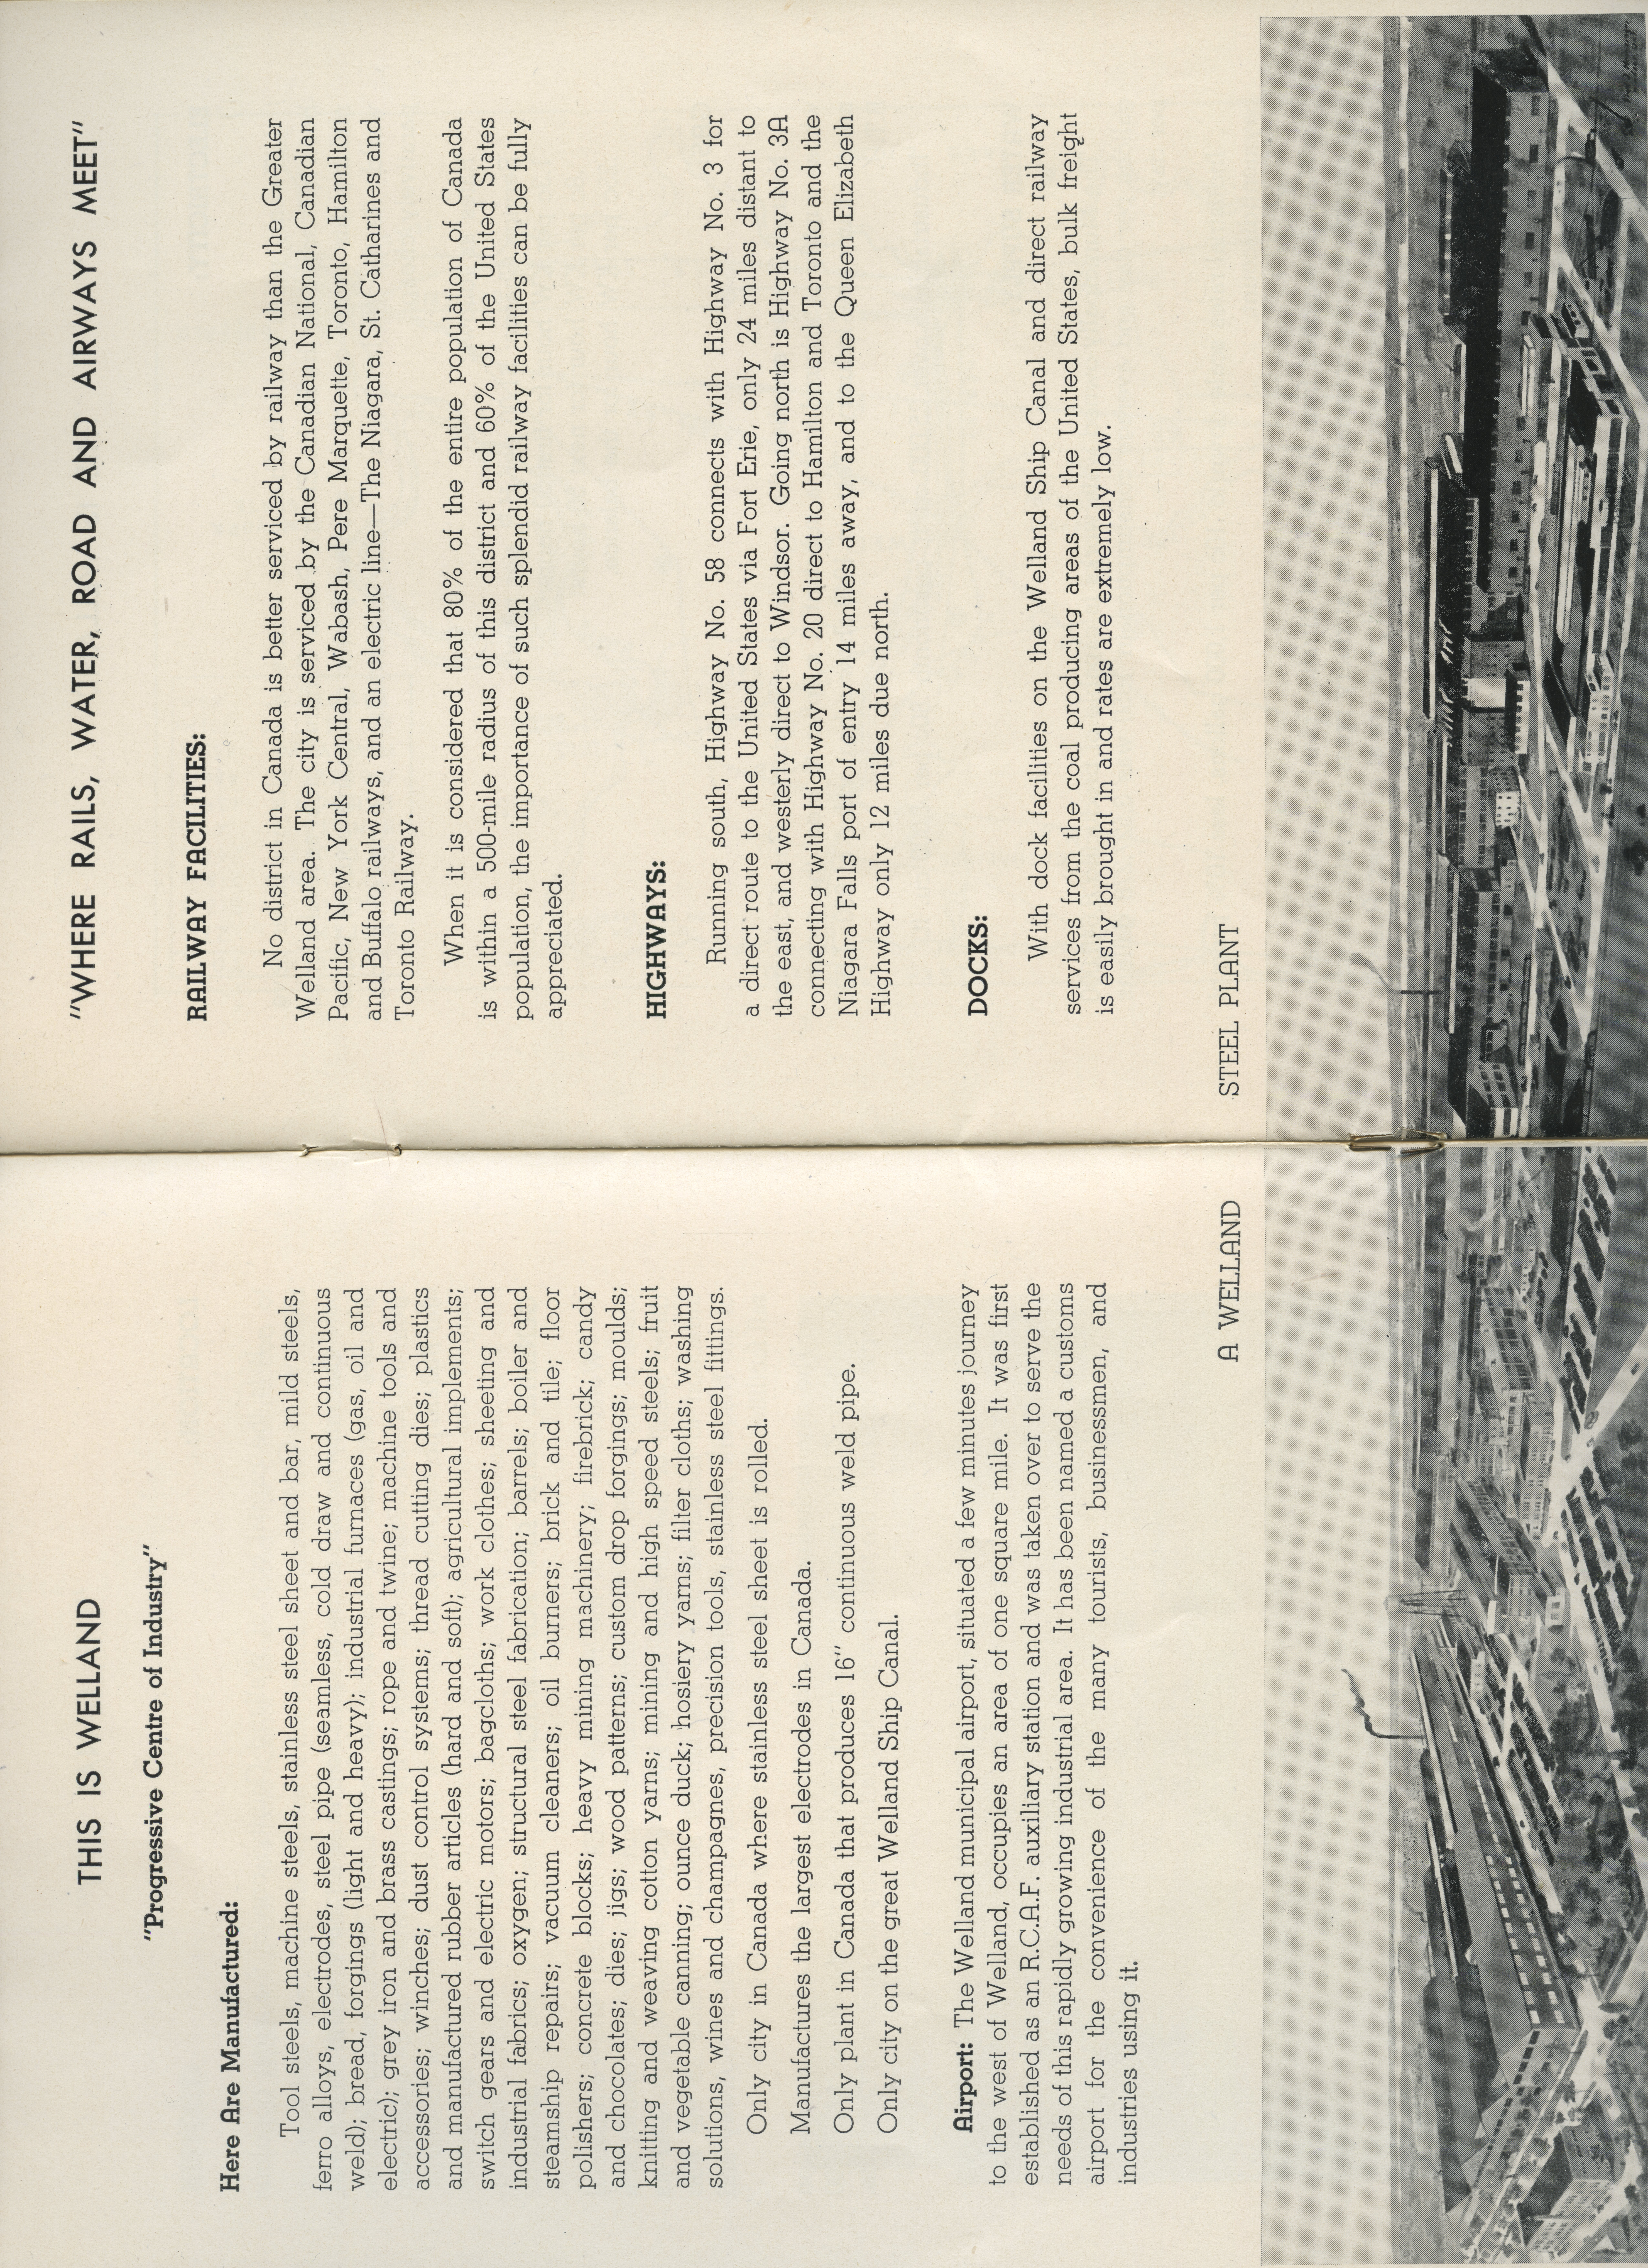 Two pages of a Welland brochure, with a black and white photo spanning the bottom of both pages.